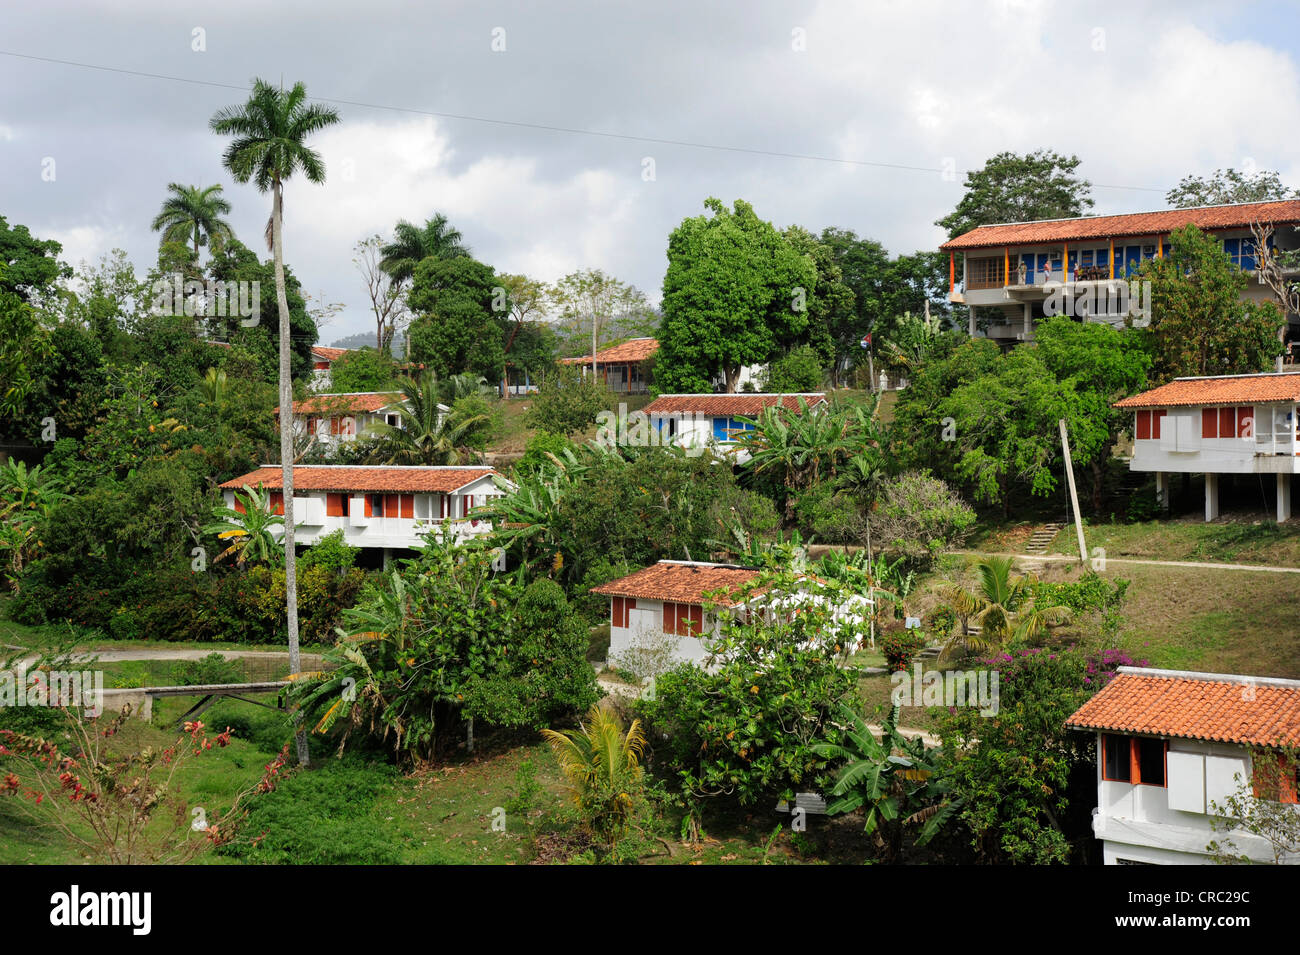 Houses in Las Terrazas, a village cooperative in the nature reserve of the Sierra del Rosario mountain range Stock Photo